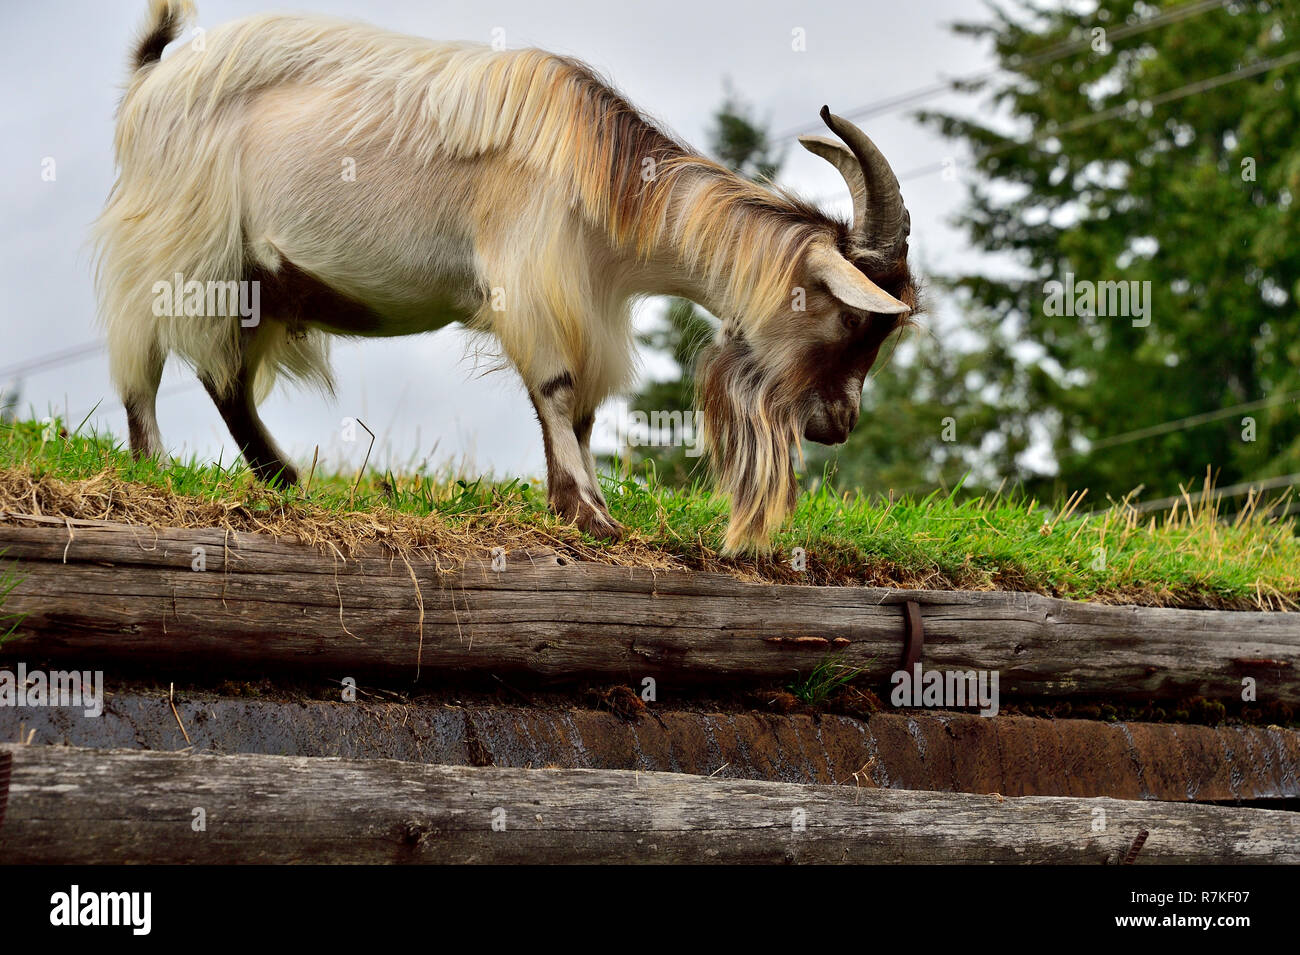 A male Billy Goat foraging on a sod roof at the Country Market in Coombs on Vancouver Island British Columbia Canada. Stock Photo